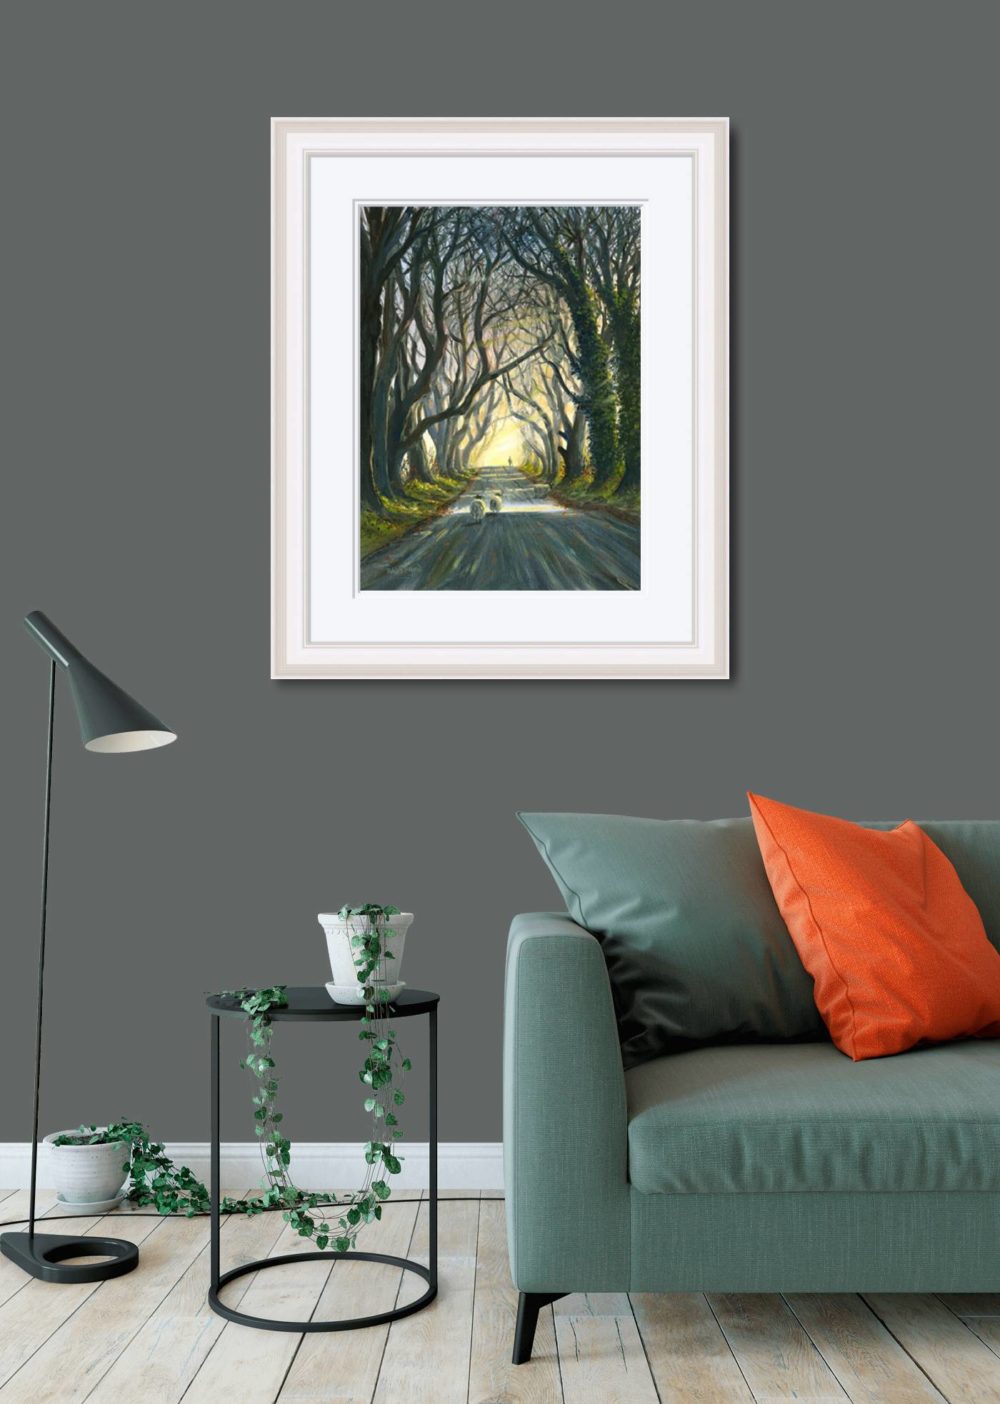 The Dark Hedges Print (Large) In White Frame In Room